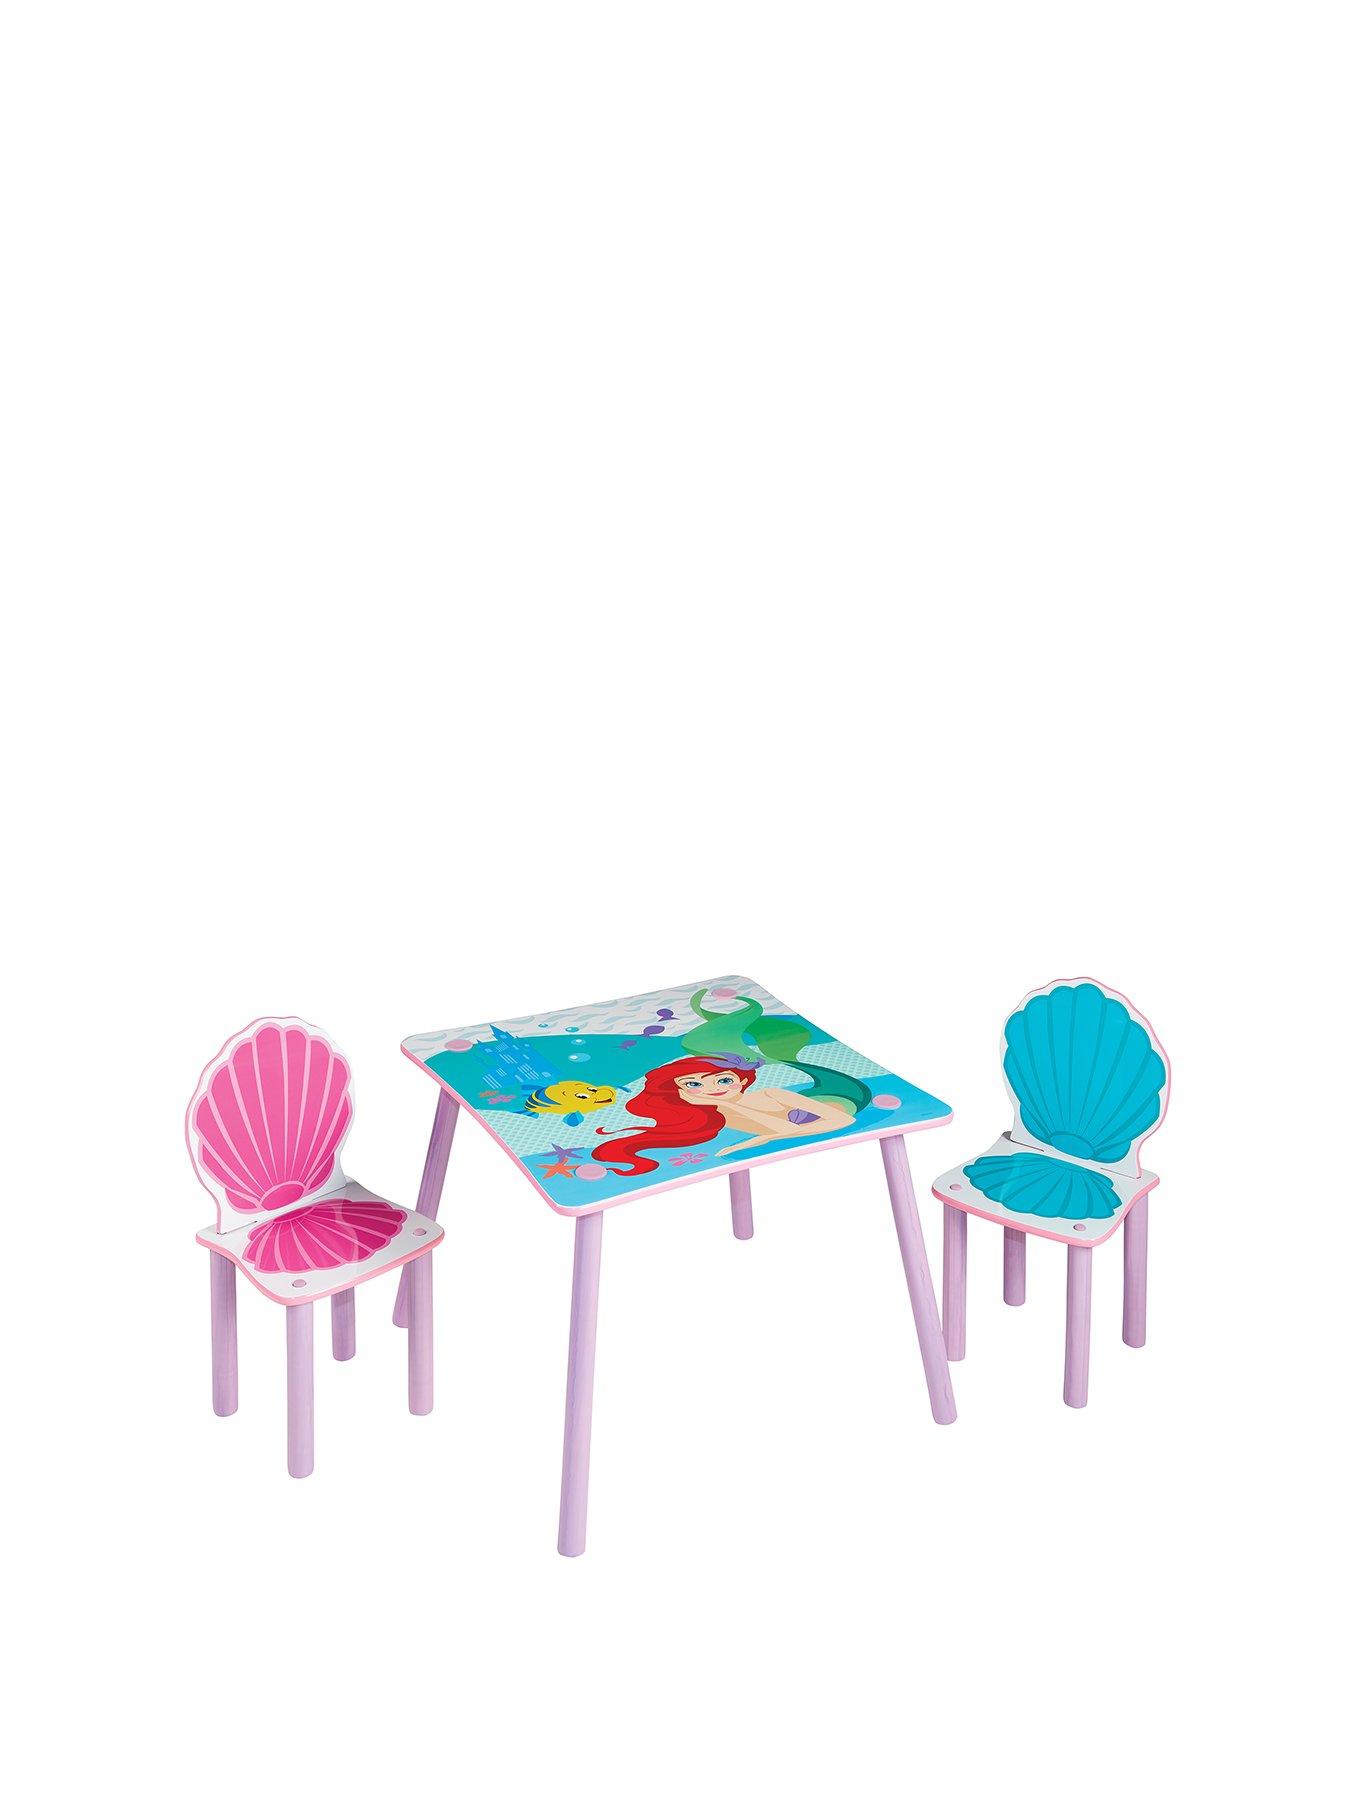 childrens table and chairs ireland